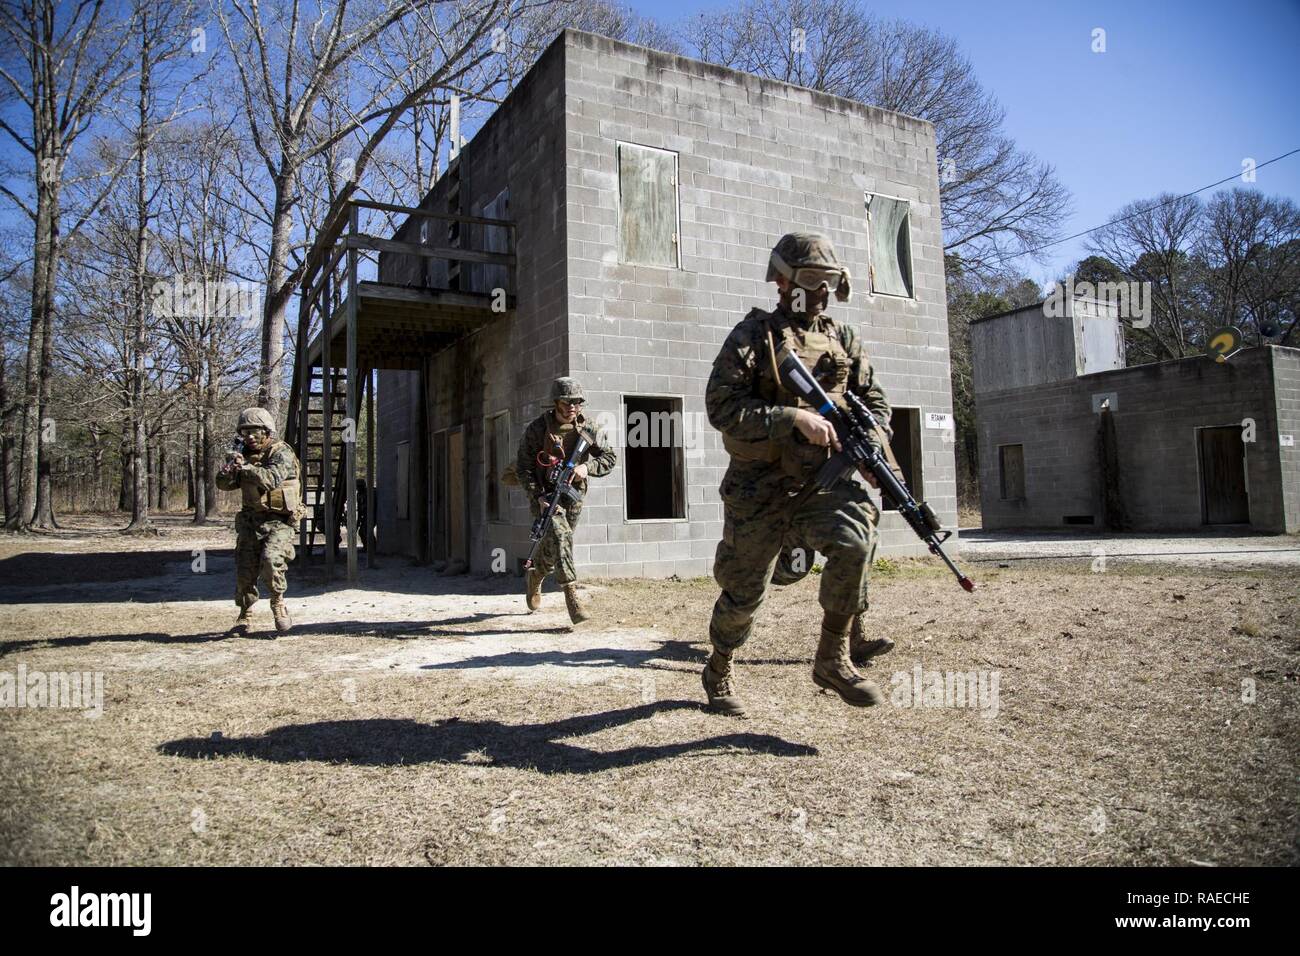 U.S. Marines with Company F (Fox Co.), Marine Combat Training Battalion (MCT), School of Infantry-East conduct Military Operations in Urban Terrain during their Basic Skills Readiness Exercise (BSRE) aboard Camp Geiger, N.C., Jan. 31, 2017. U.S. Marines attending MCT go through BSRE, a 24 hour evaluation testing them in all the skills that they have learned while in training. Stock Photo